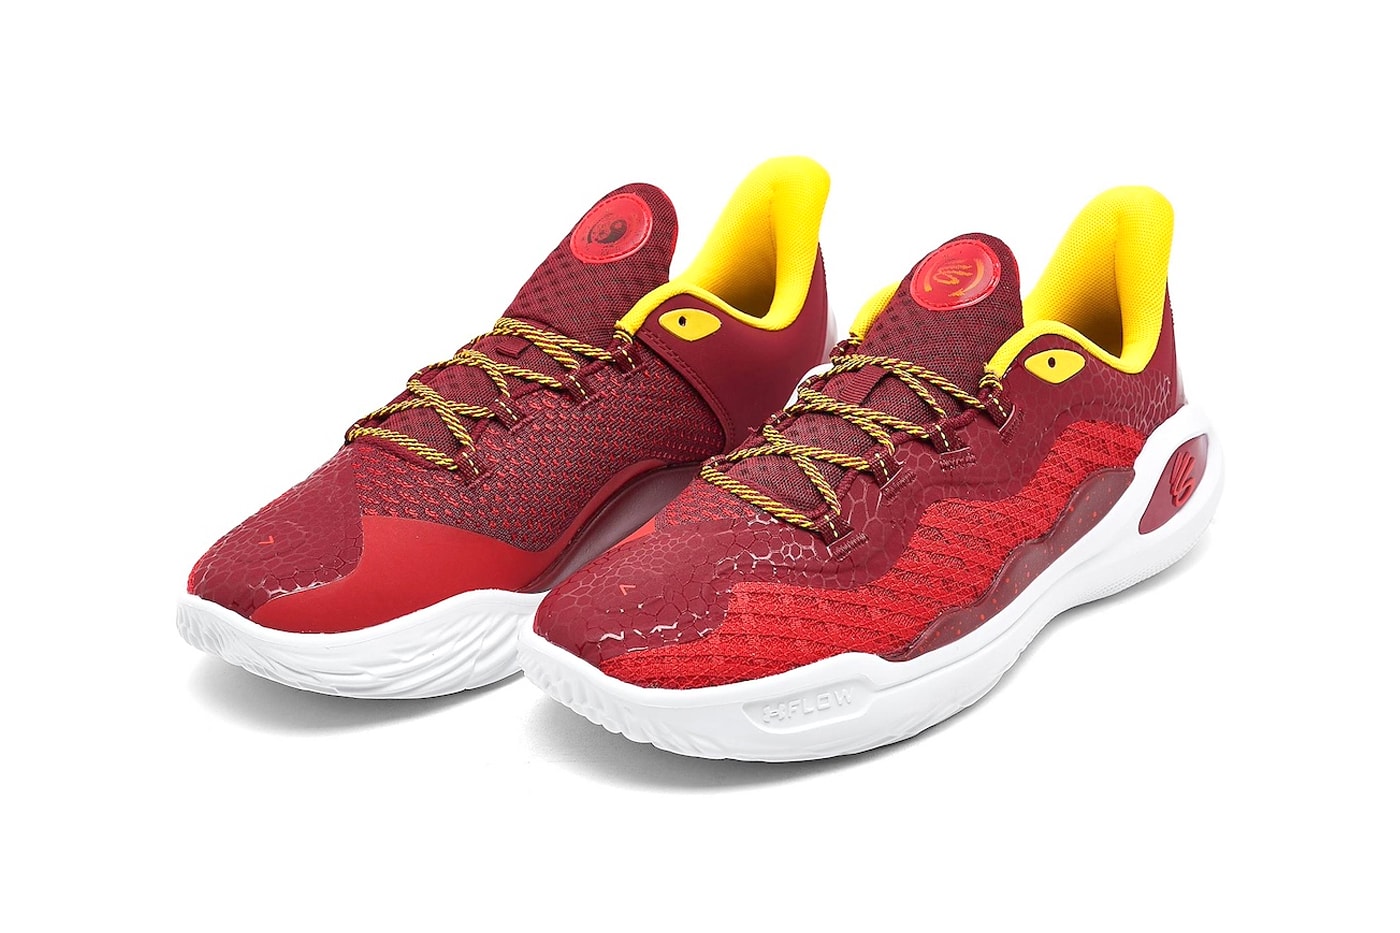 Under Armour Curry 11 "Bruce Lee Fire" 3026618-600 Red/Cardinal-Red steph curry stephen gsw golden state warriors nba basketball